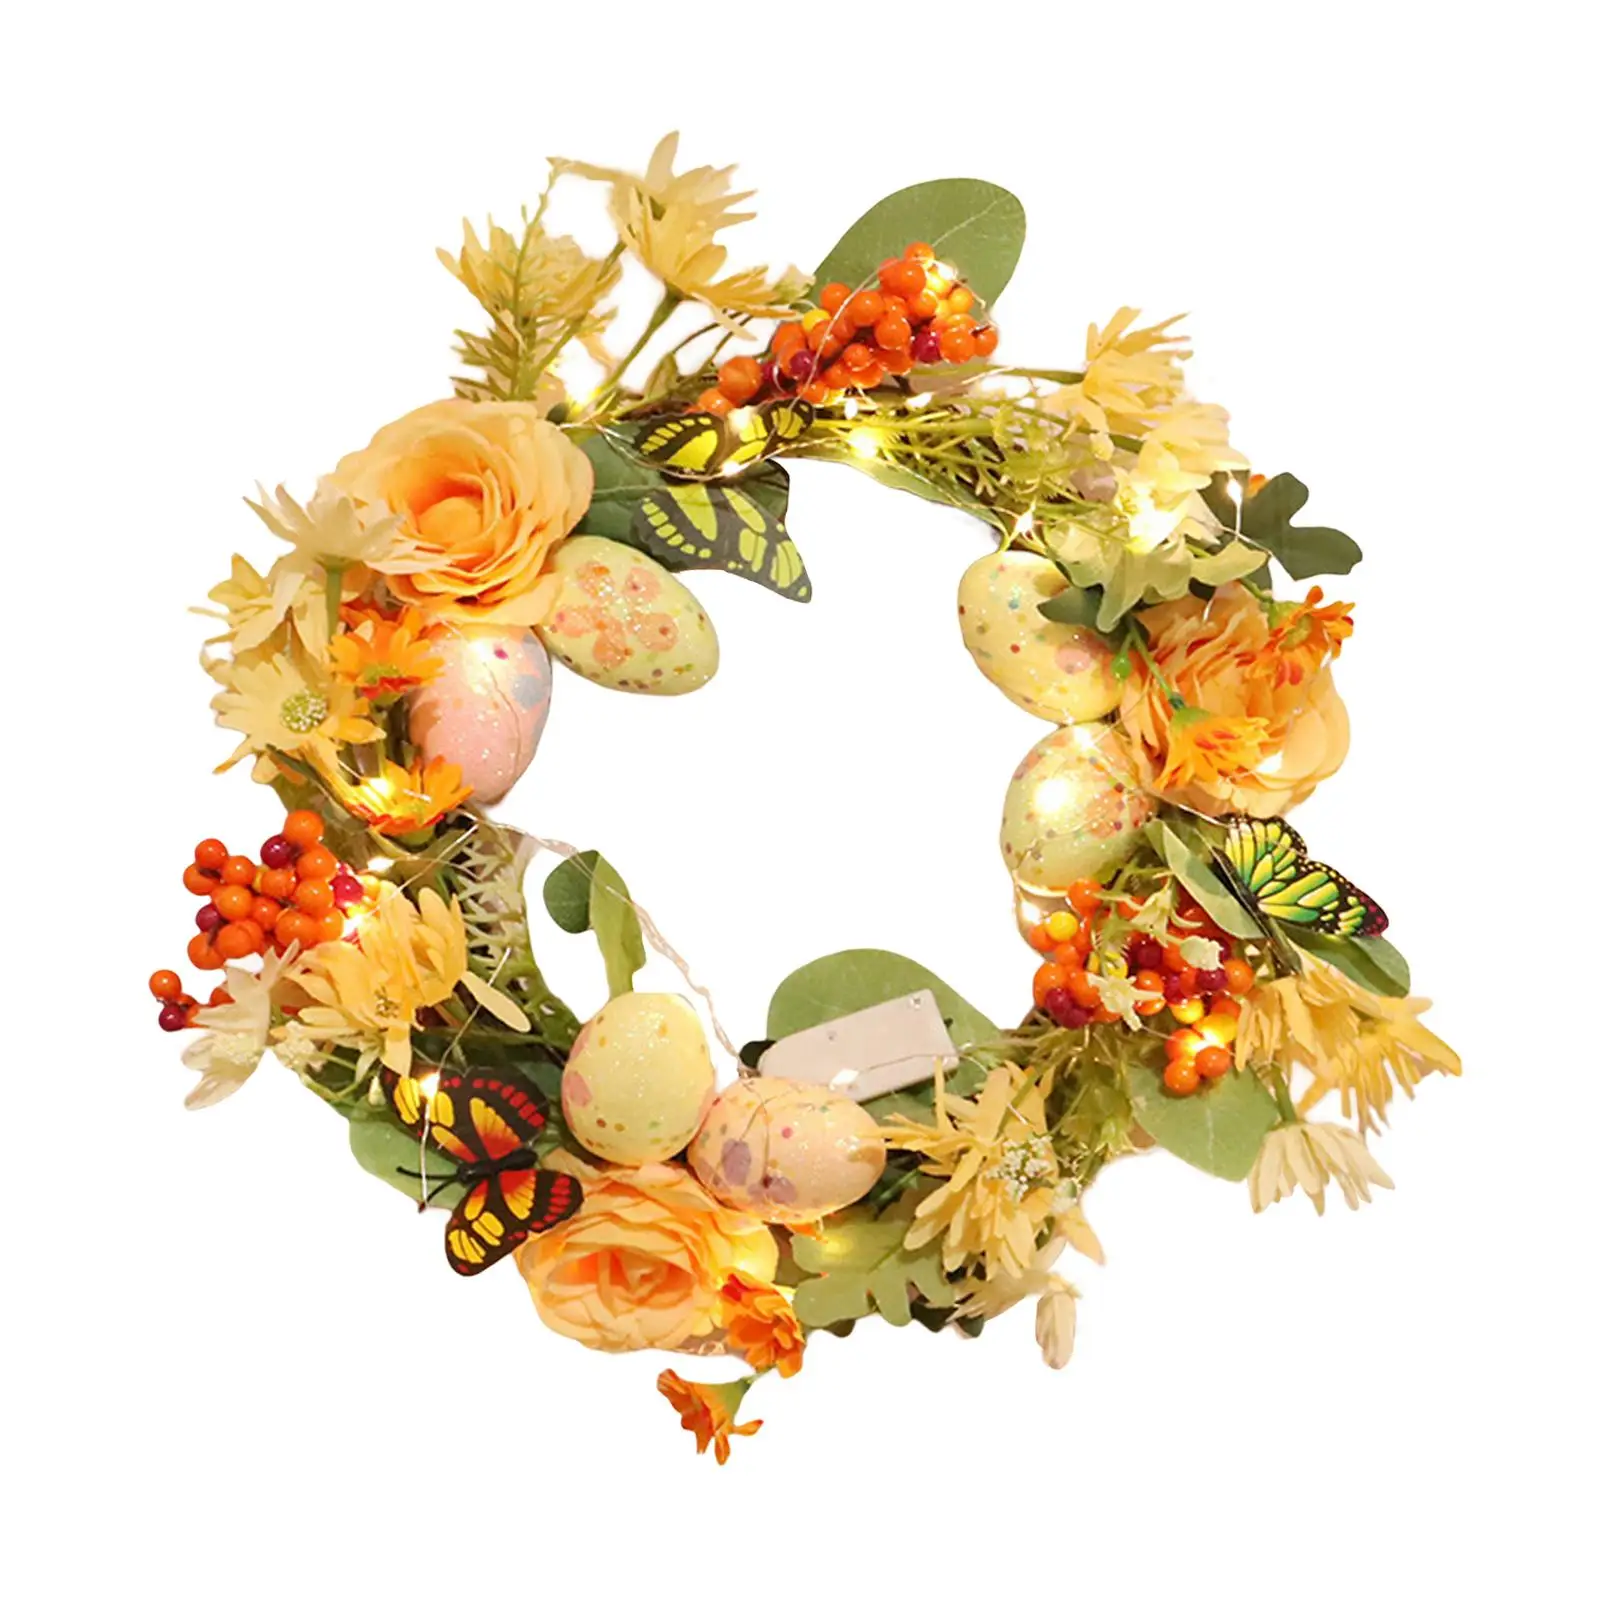 Lighted Easter Wreath Front Door Wreath with Colorful Egg 12inch Ornament Flowers Wreaths for Wedding Photo Prop Festival Party